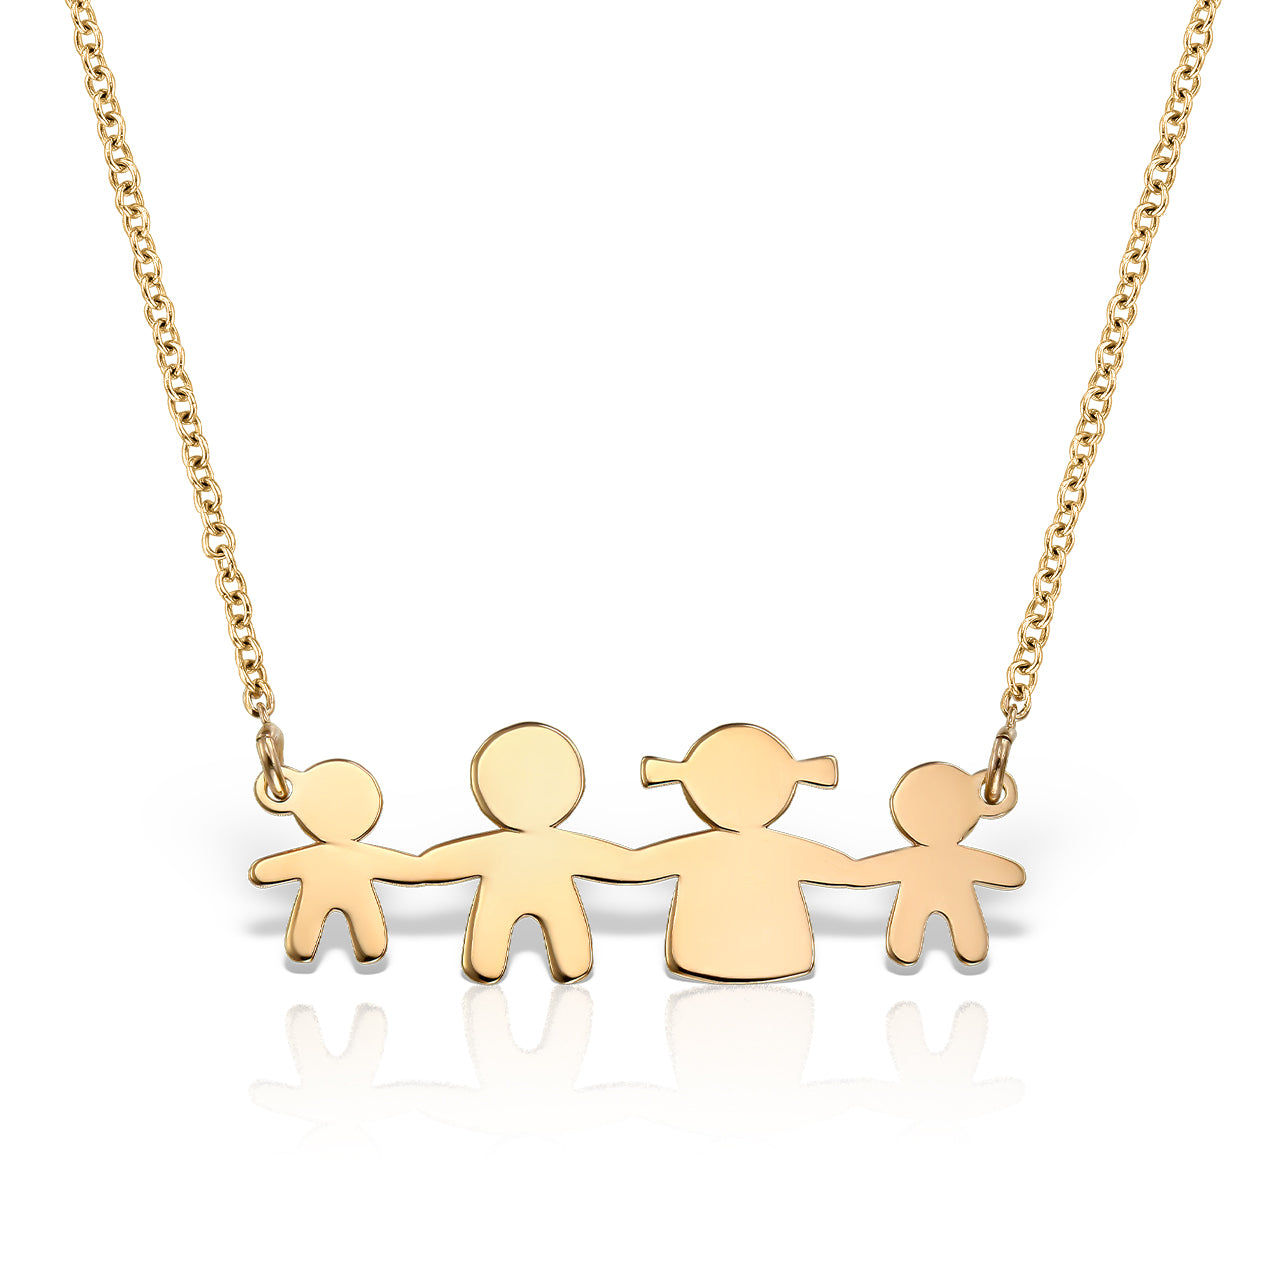 Necklace pendant Mother&Father&Sons, in rose gold - zeaetsia